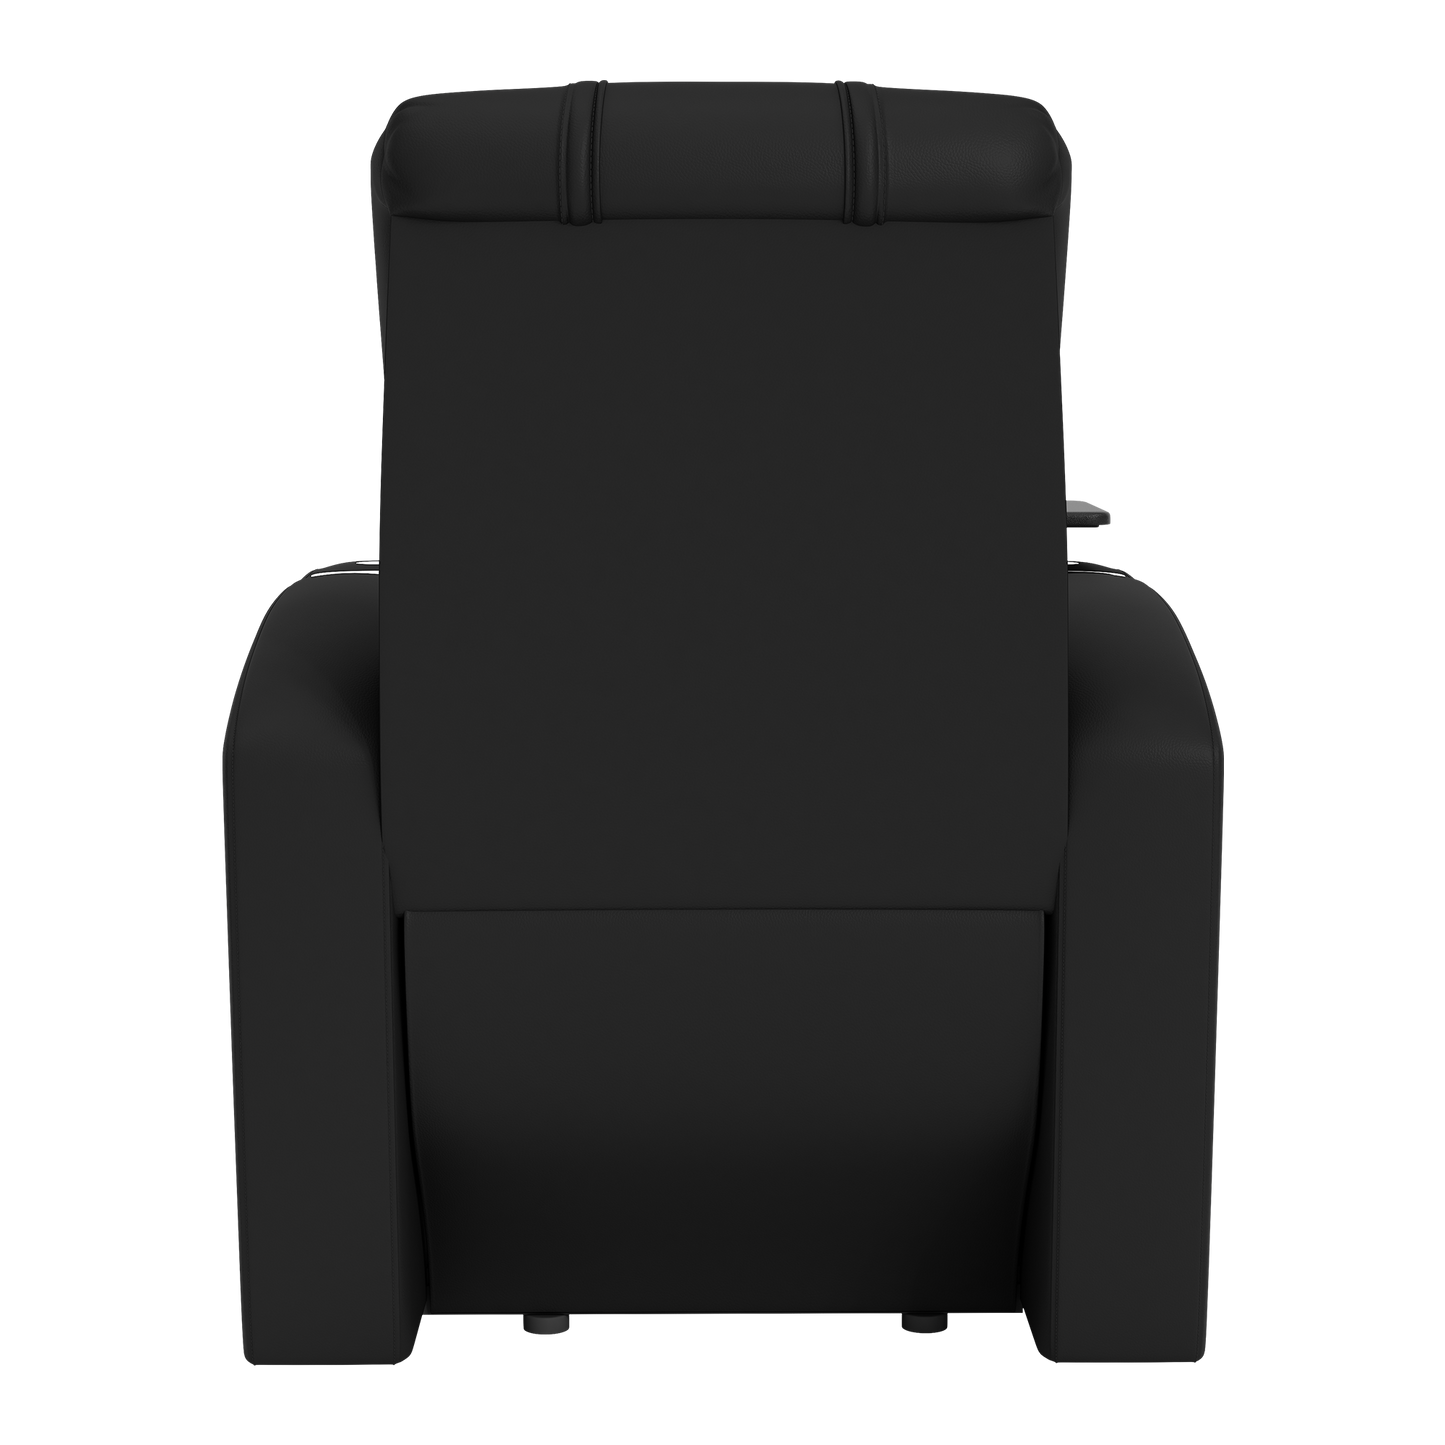 Stealth Power Plus Recliner with Tampa University Primary Logo